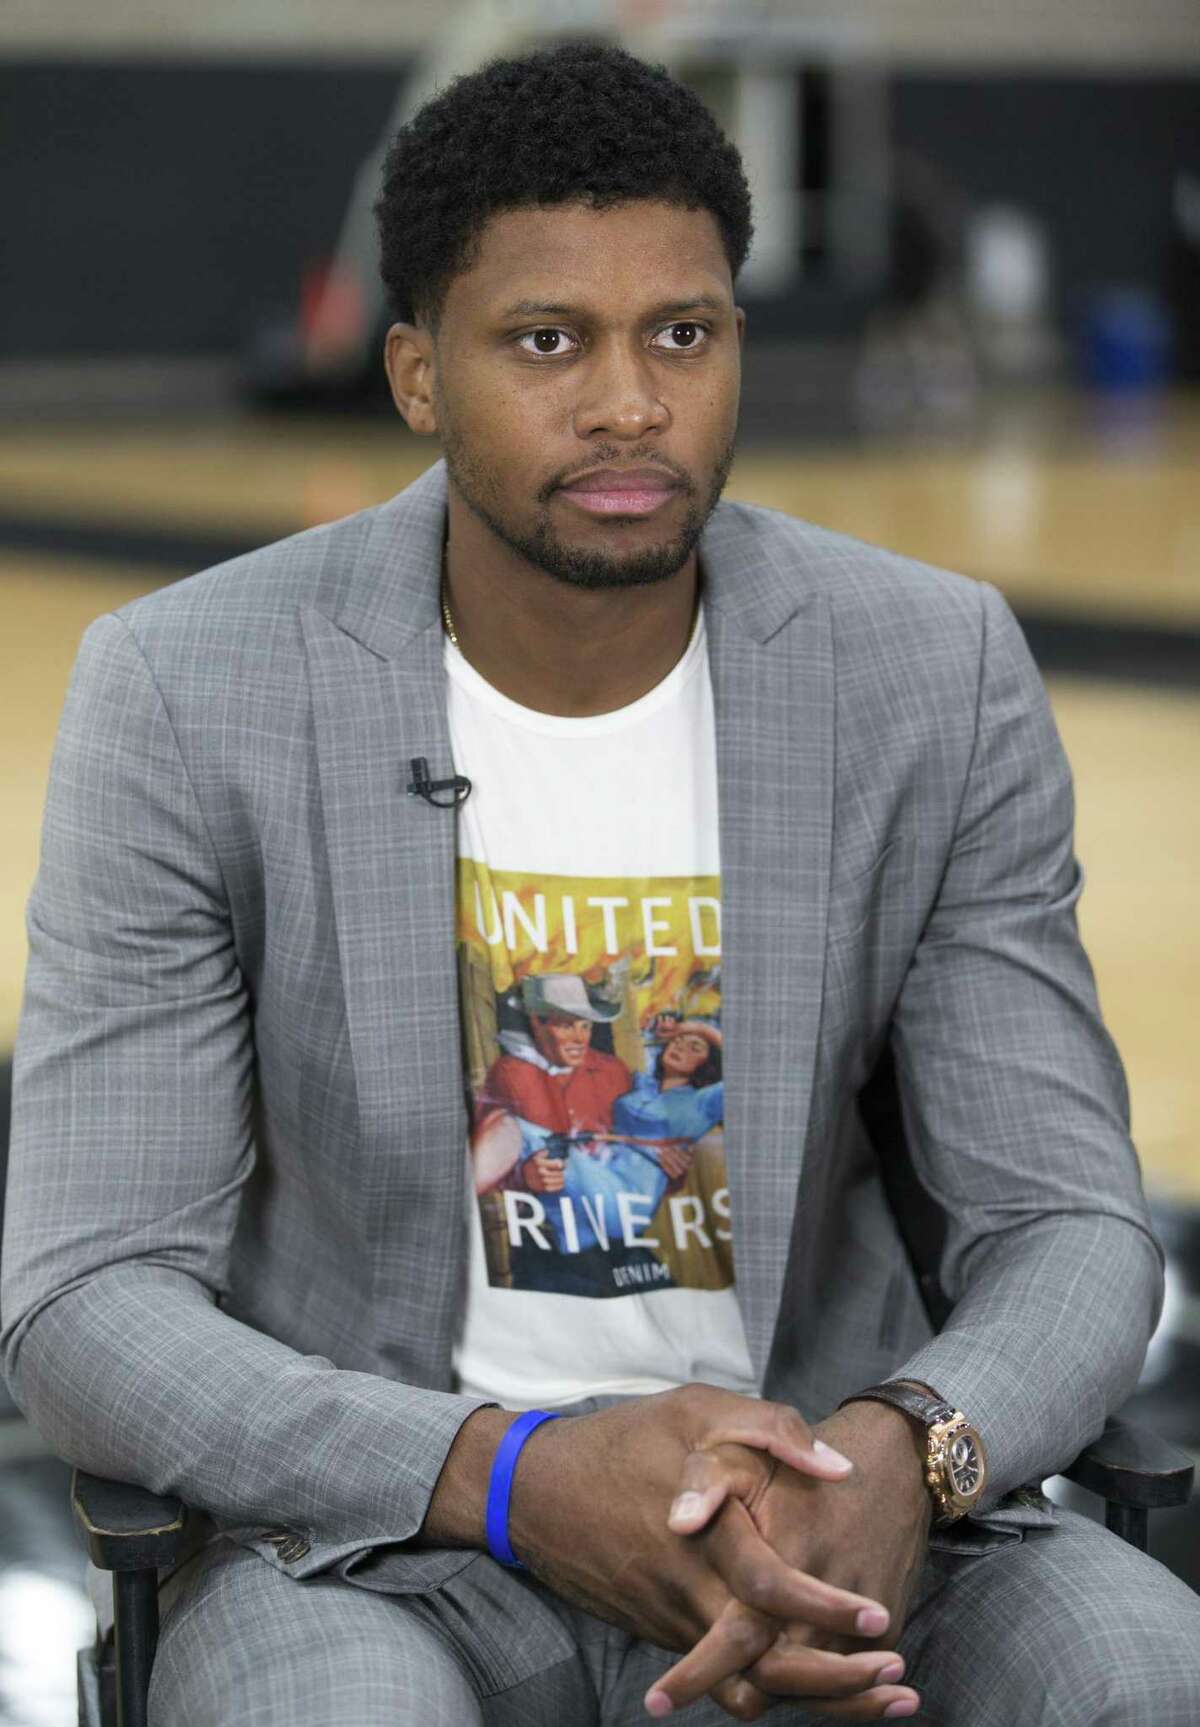 News Spurs player Rudy Gay speaks Wednesday, Sept. 13, 2017 to the media at the Spurs' practice facility.